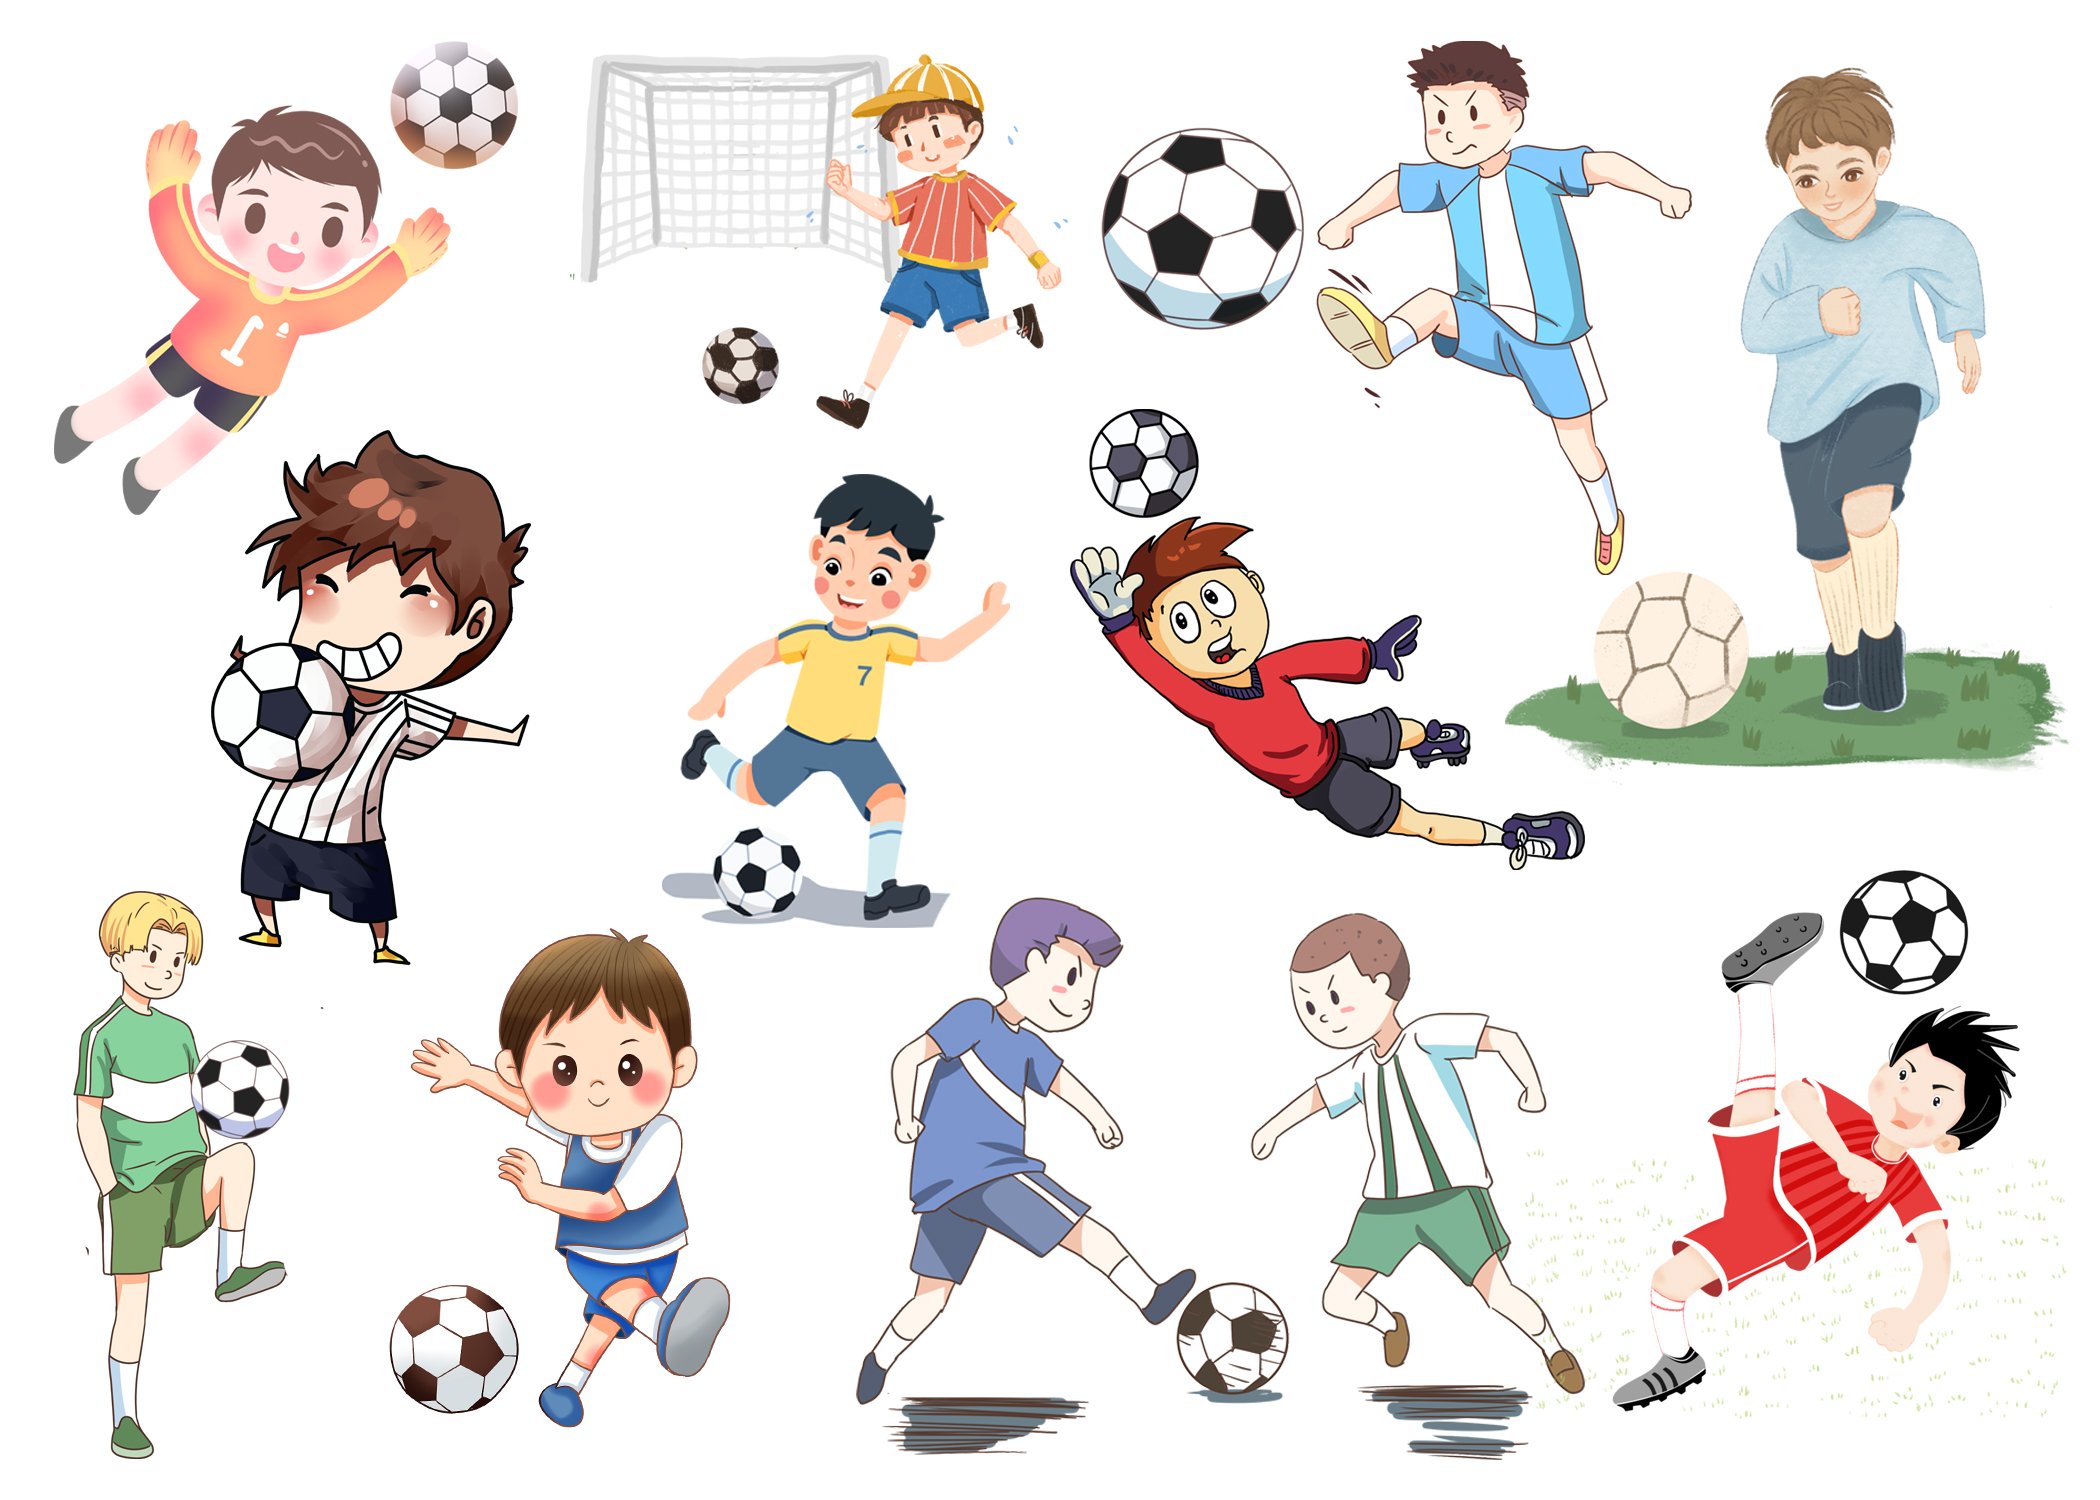 Two boys playing soccer together Royalty Free Vector Image